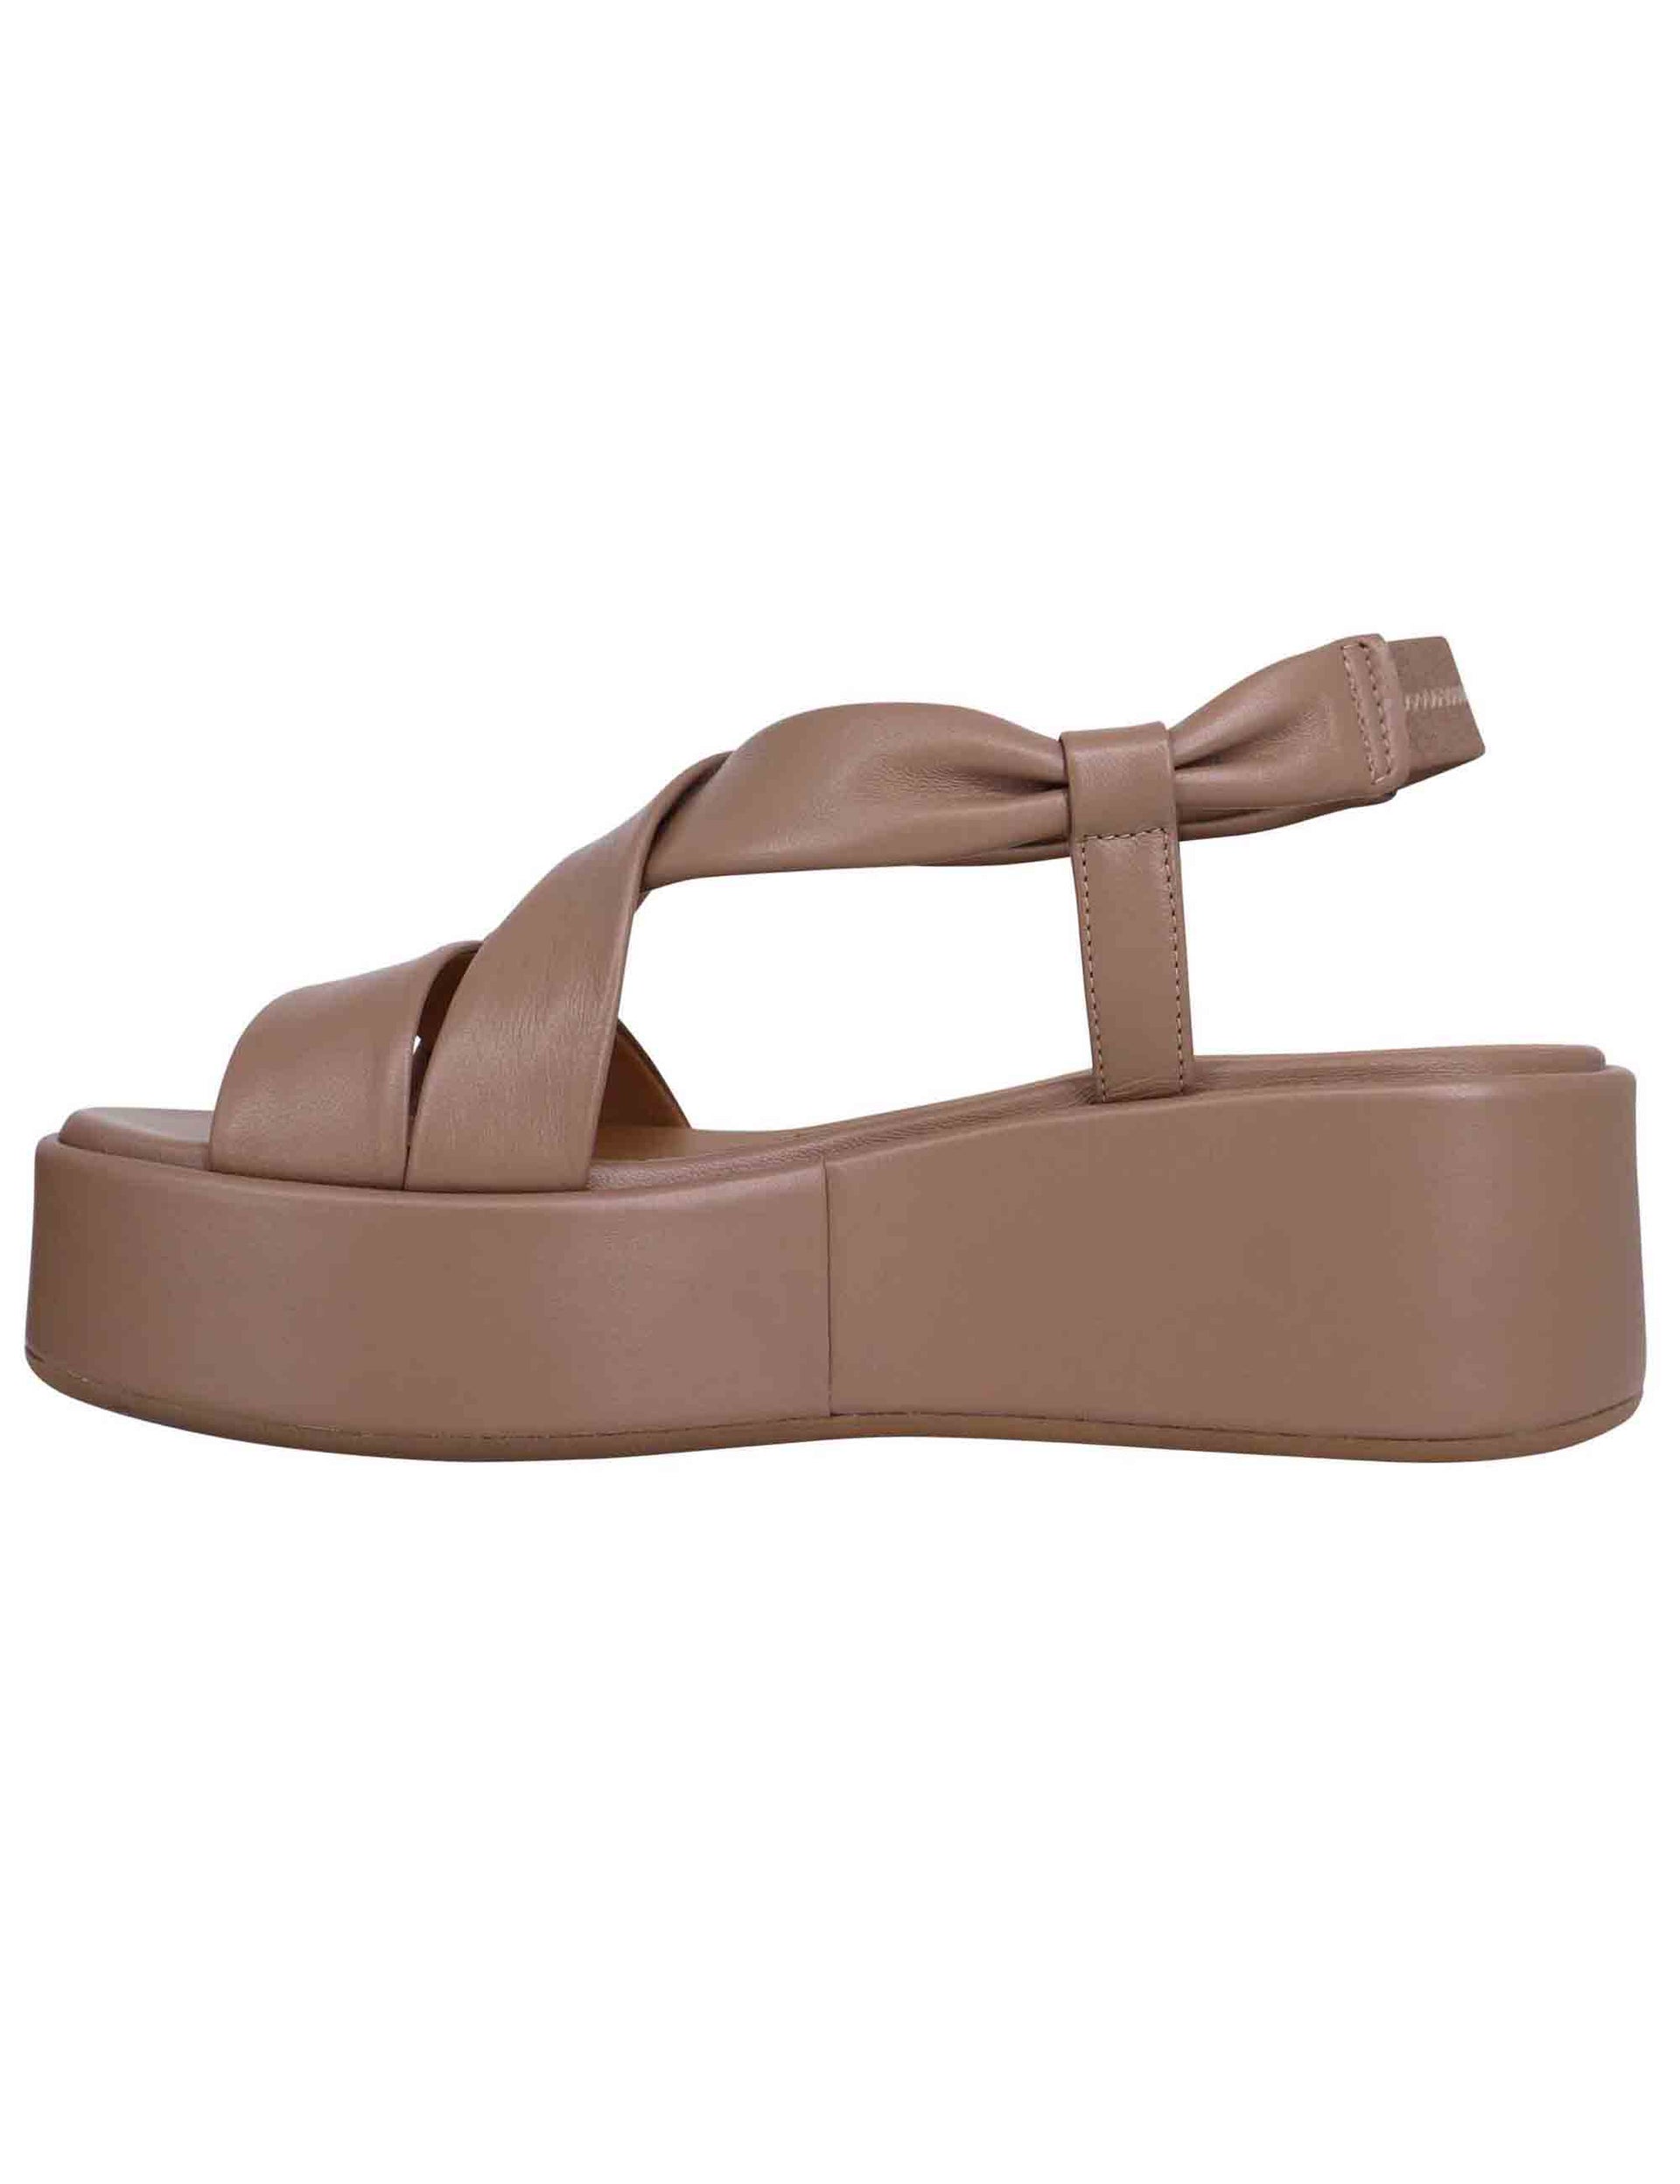 Women's sandals in taupe leather with matching banded wedge